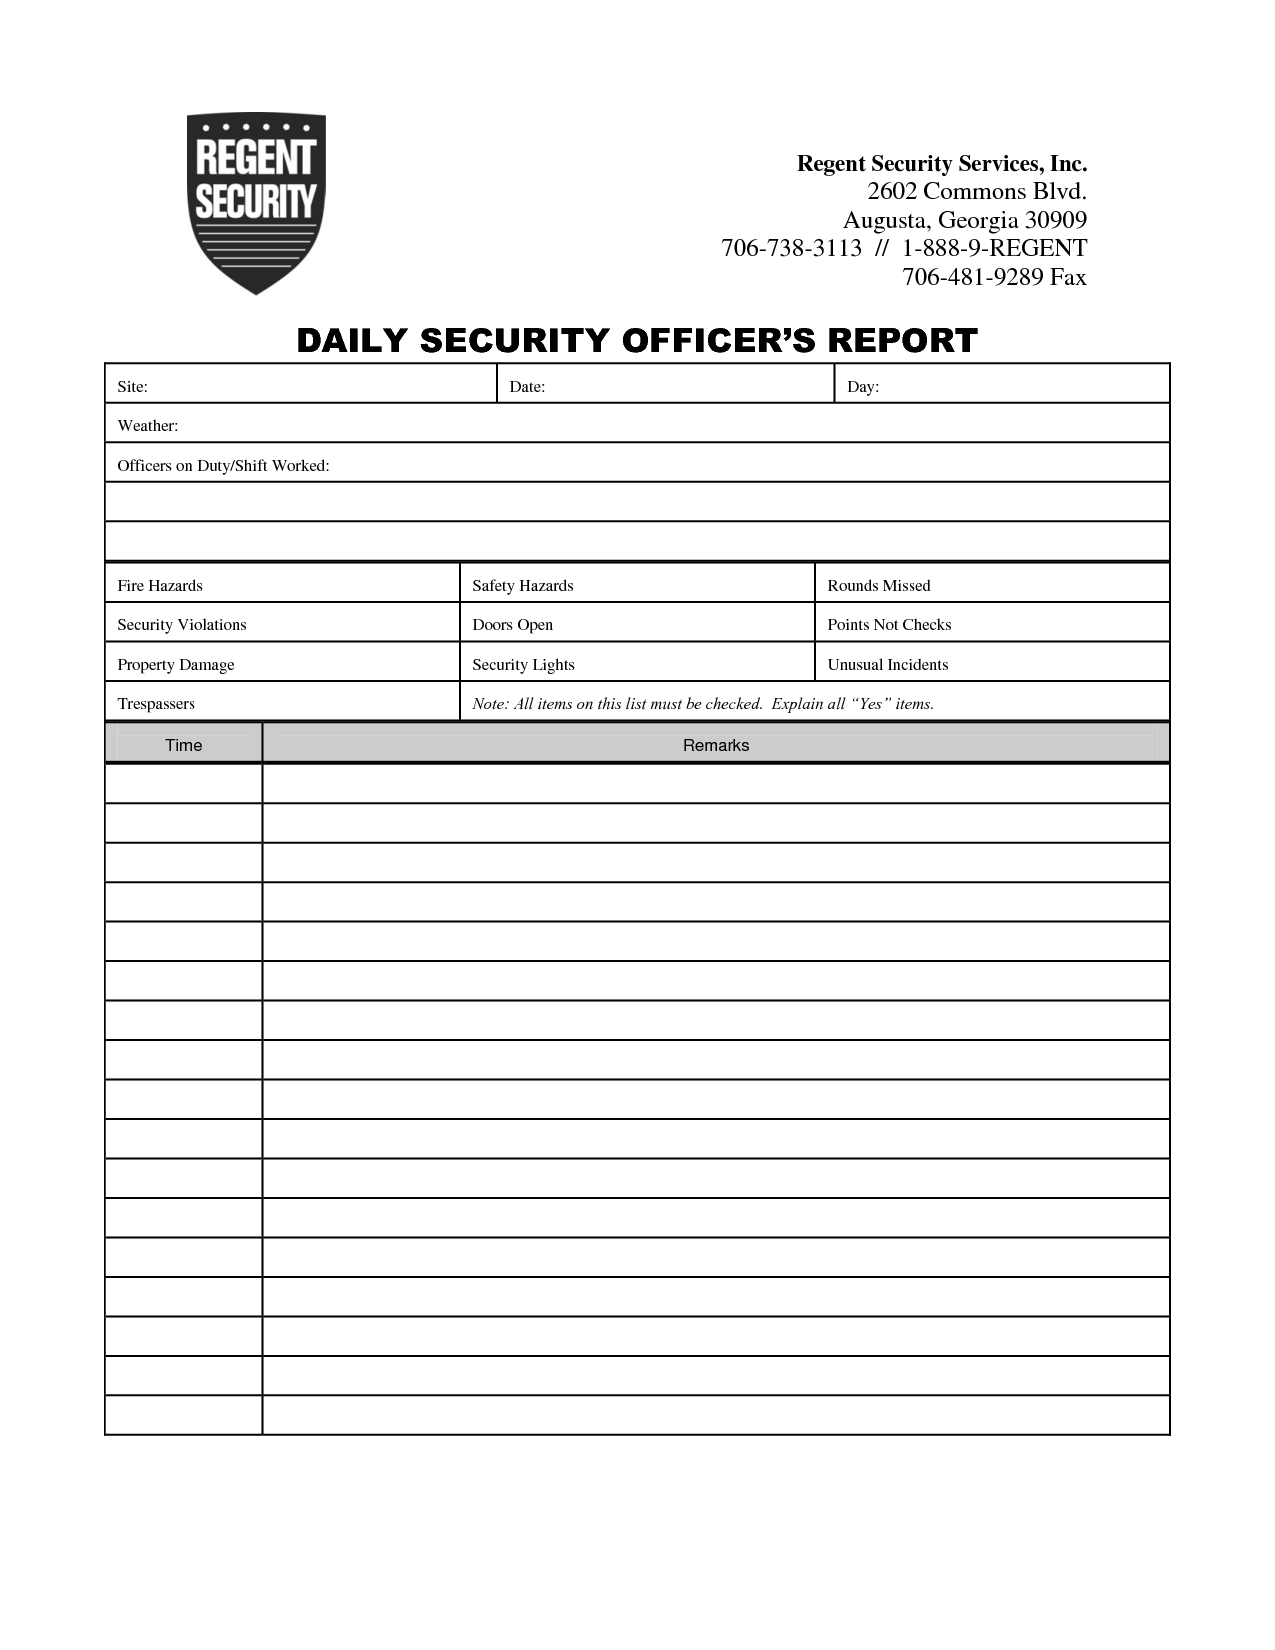 security daily activity report template   Boat.jeremyeaton.co